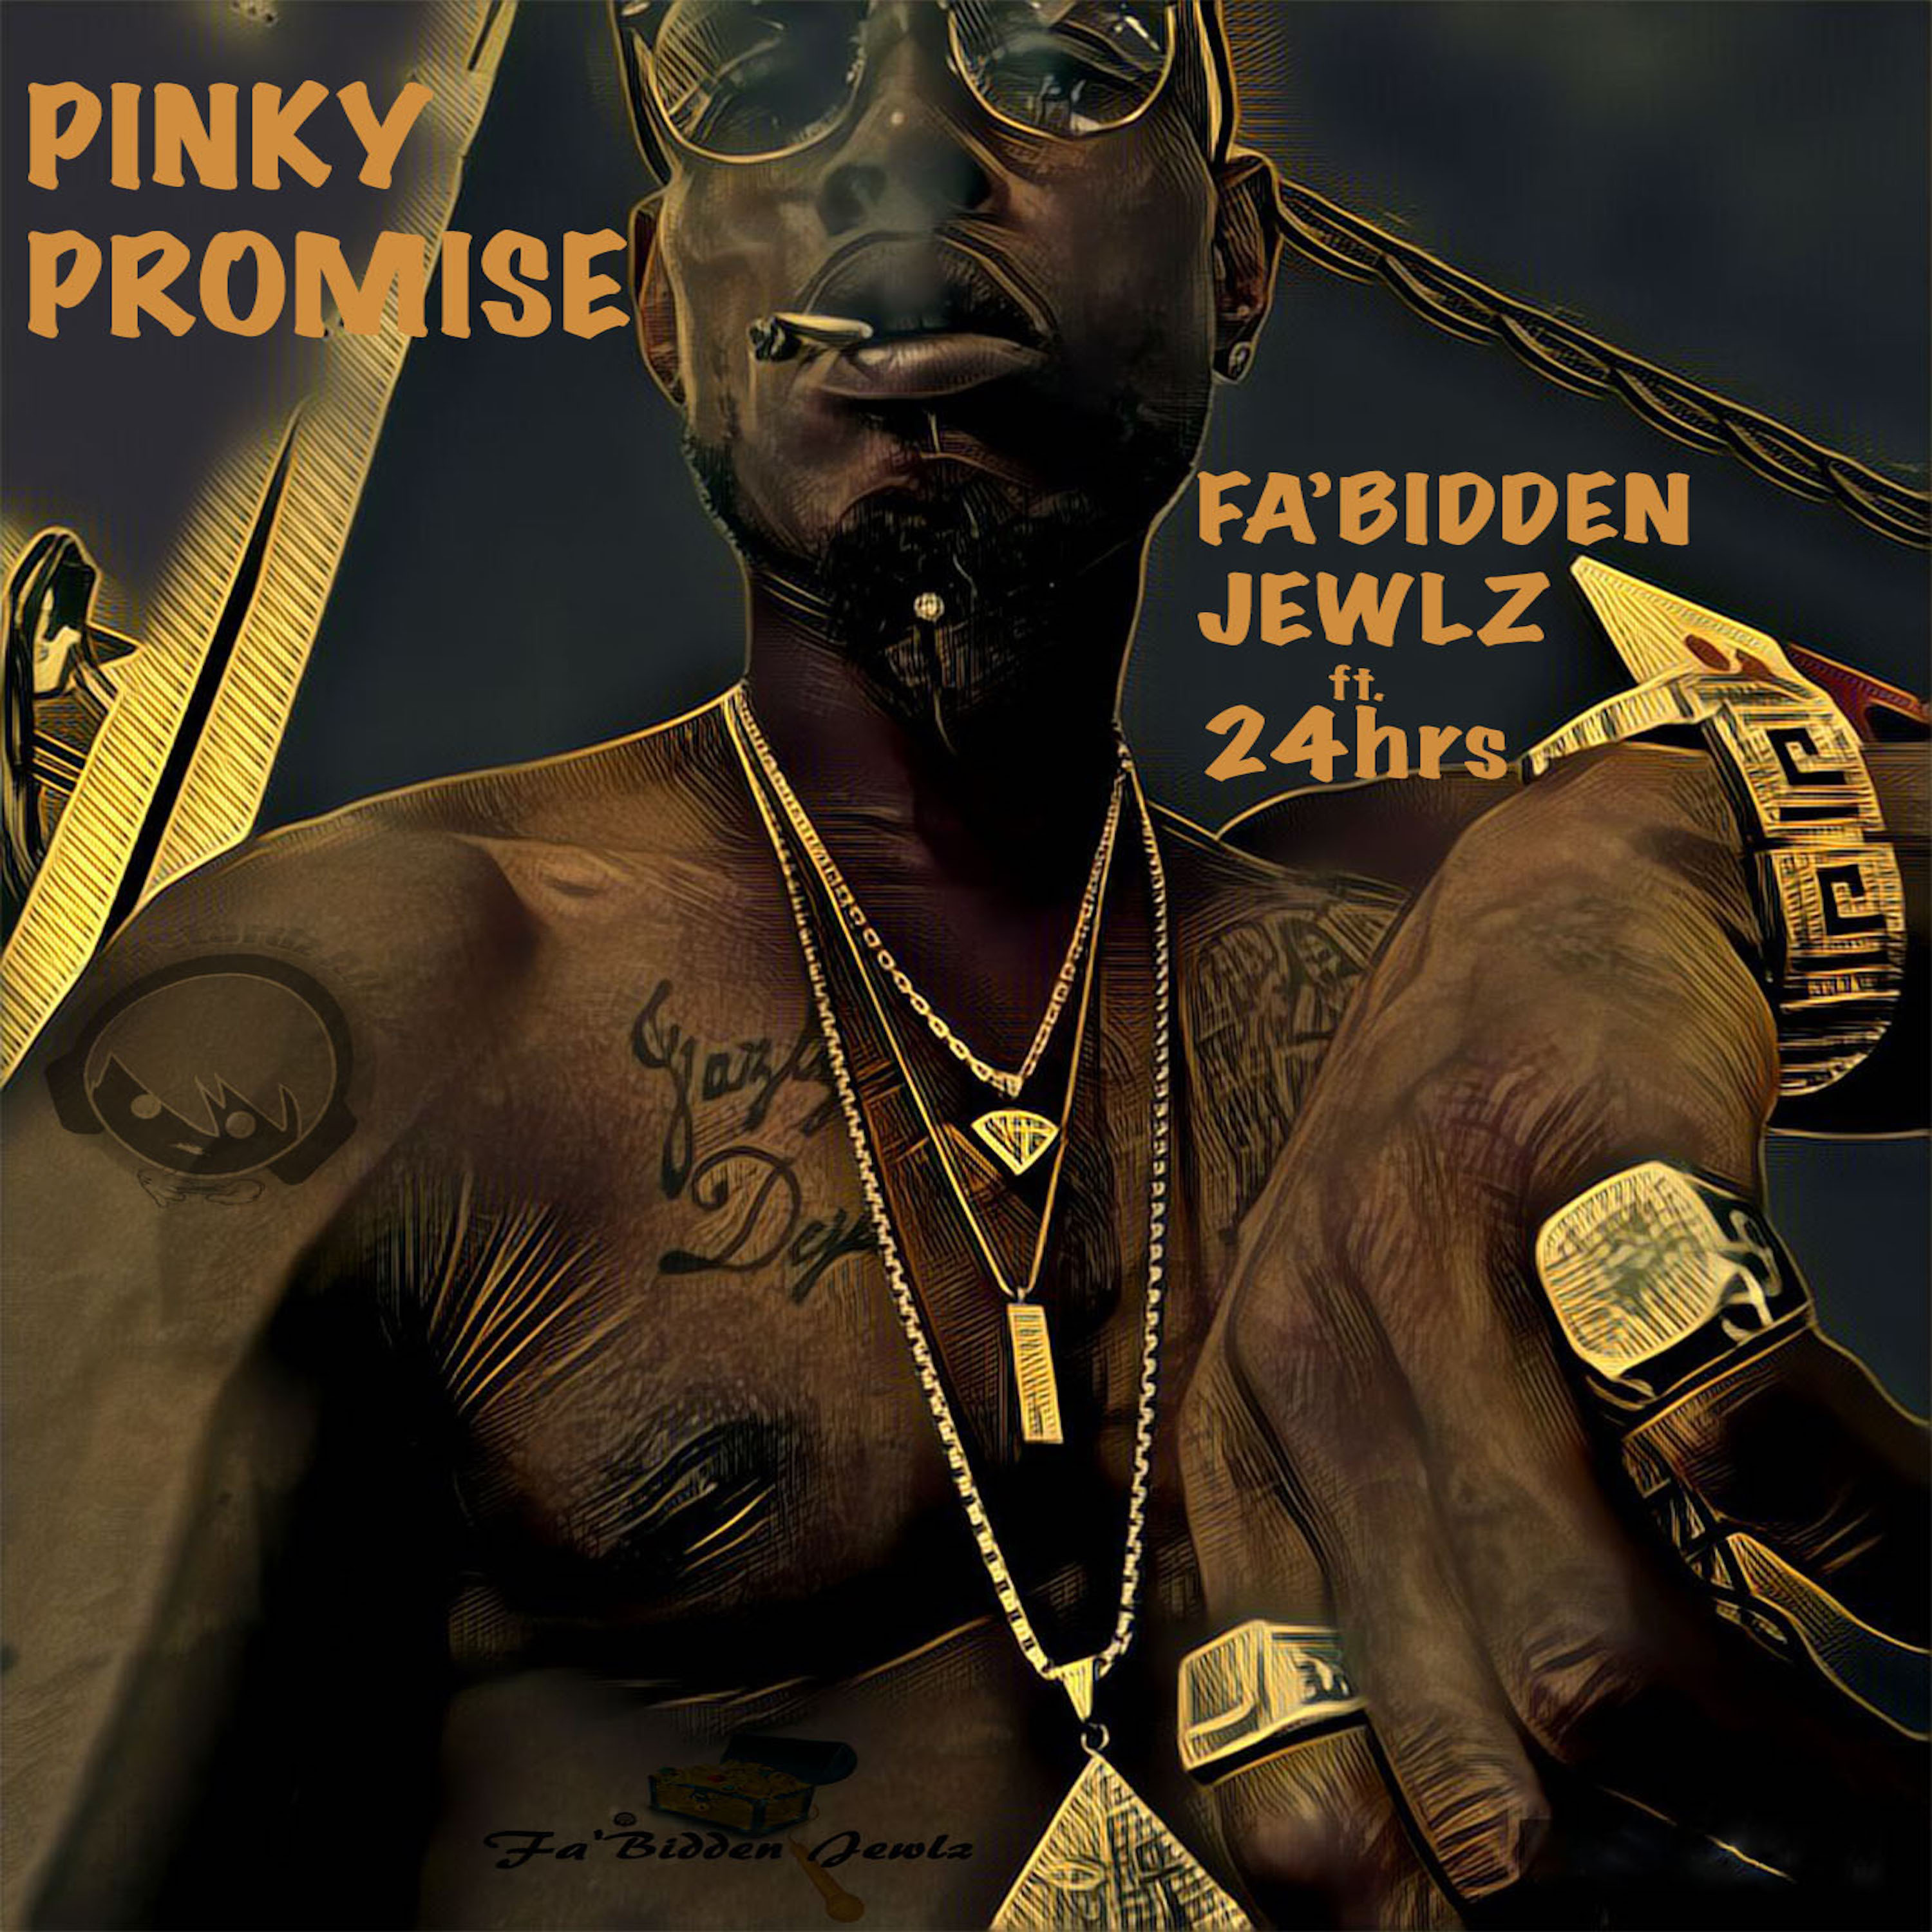 Art for Pinky Promise  by Fa'Bidden Jewlz ft. 24hrs